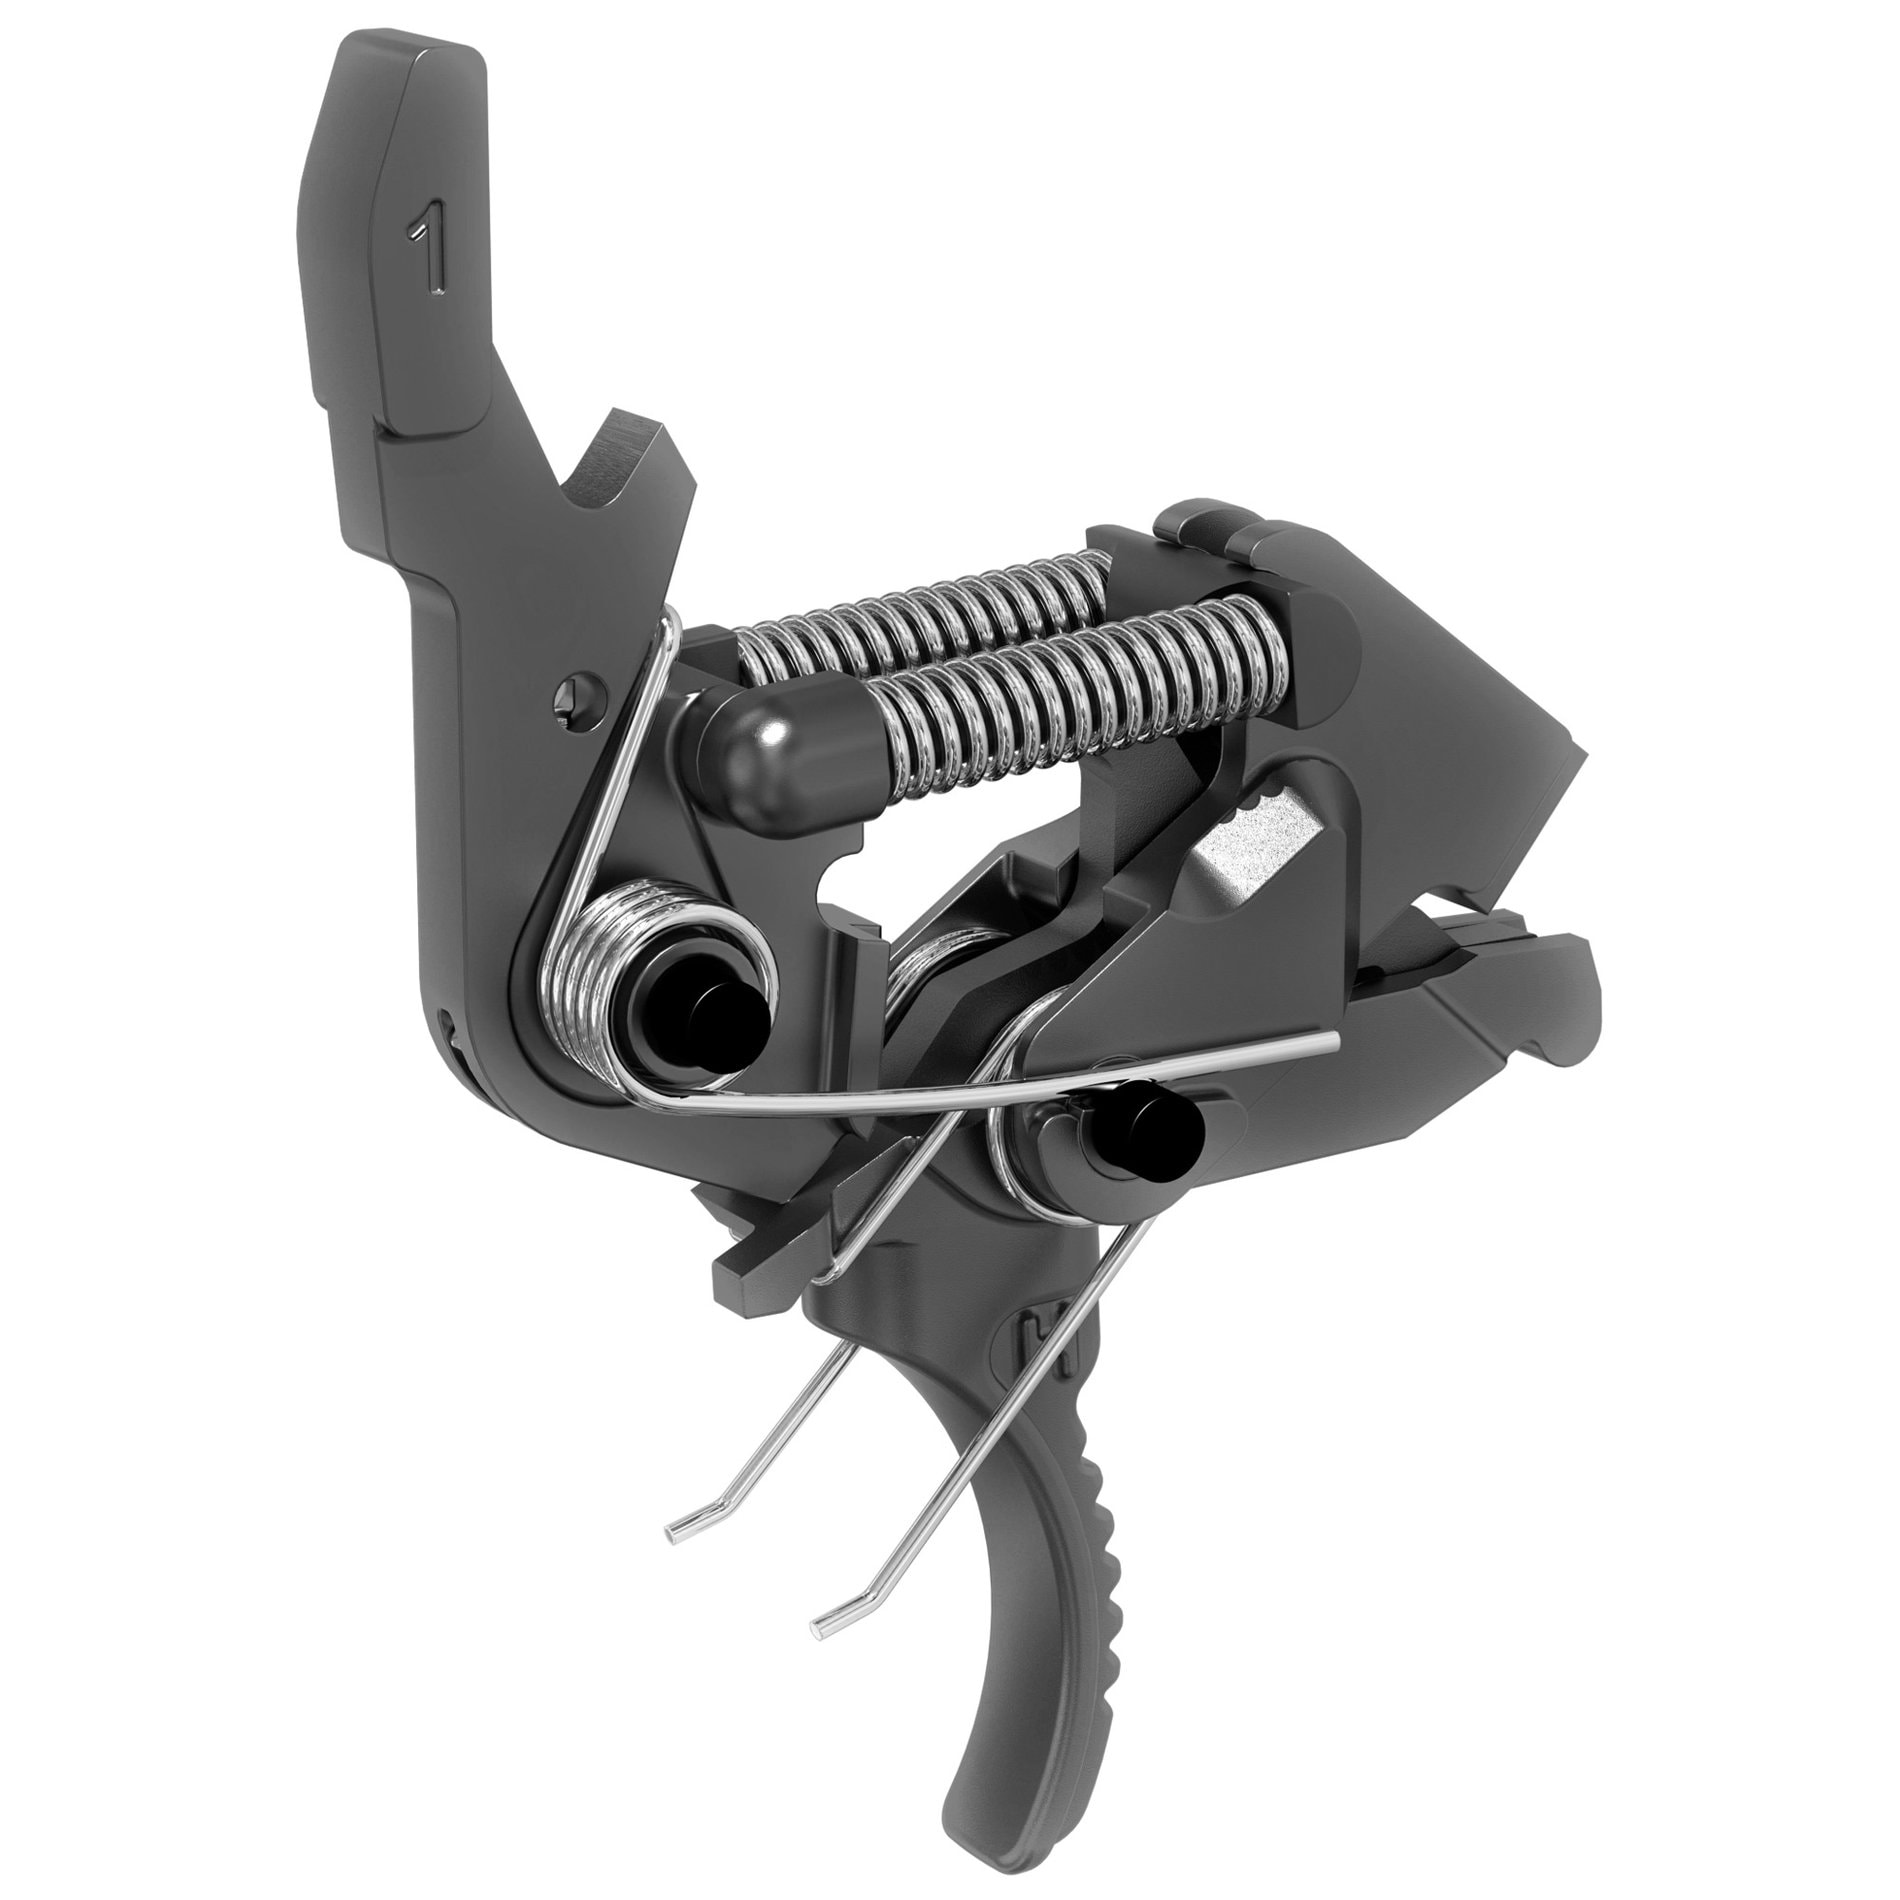 Hiperfire X2S 2-Stage Drop In AR-15 Trigger - 3.5 lb Pull Weight - AT3 Tactical